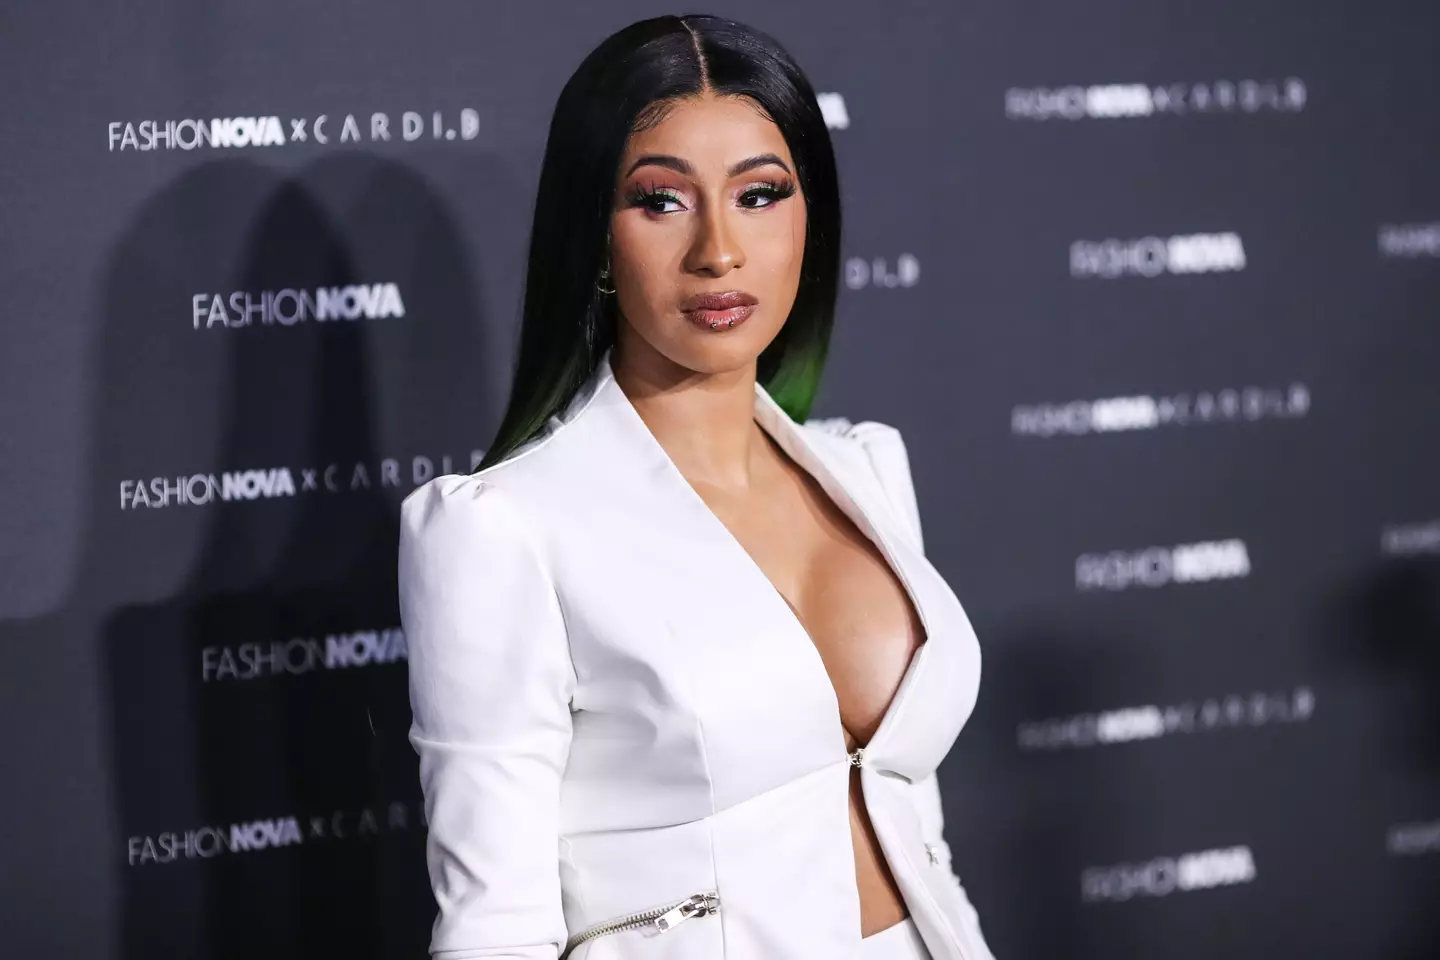 Cardi B was charged with third-degree assault.